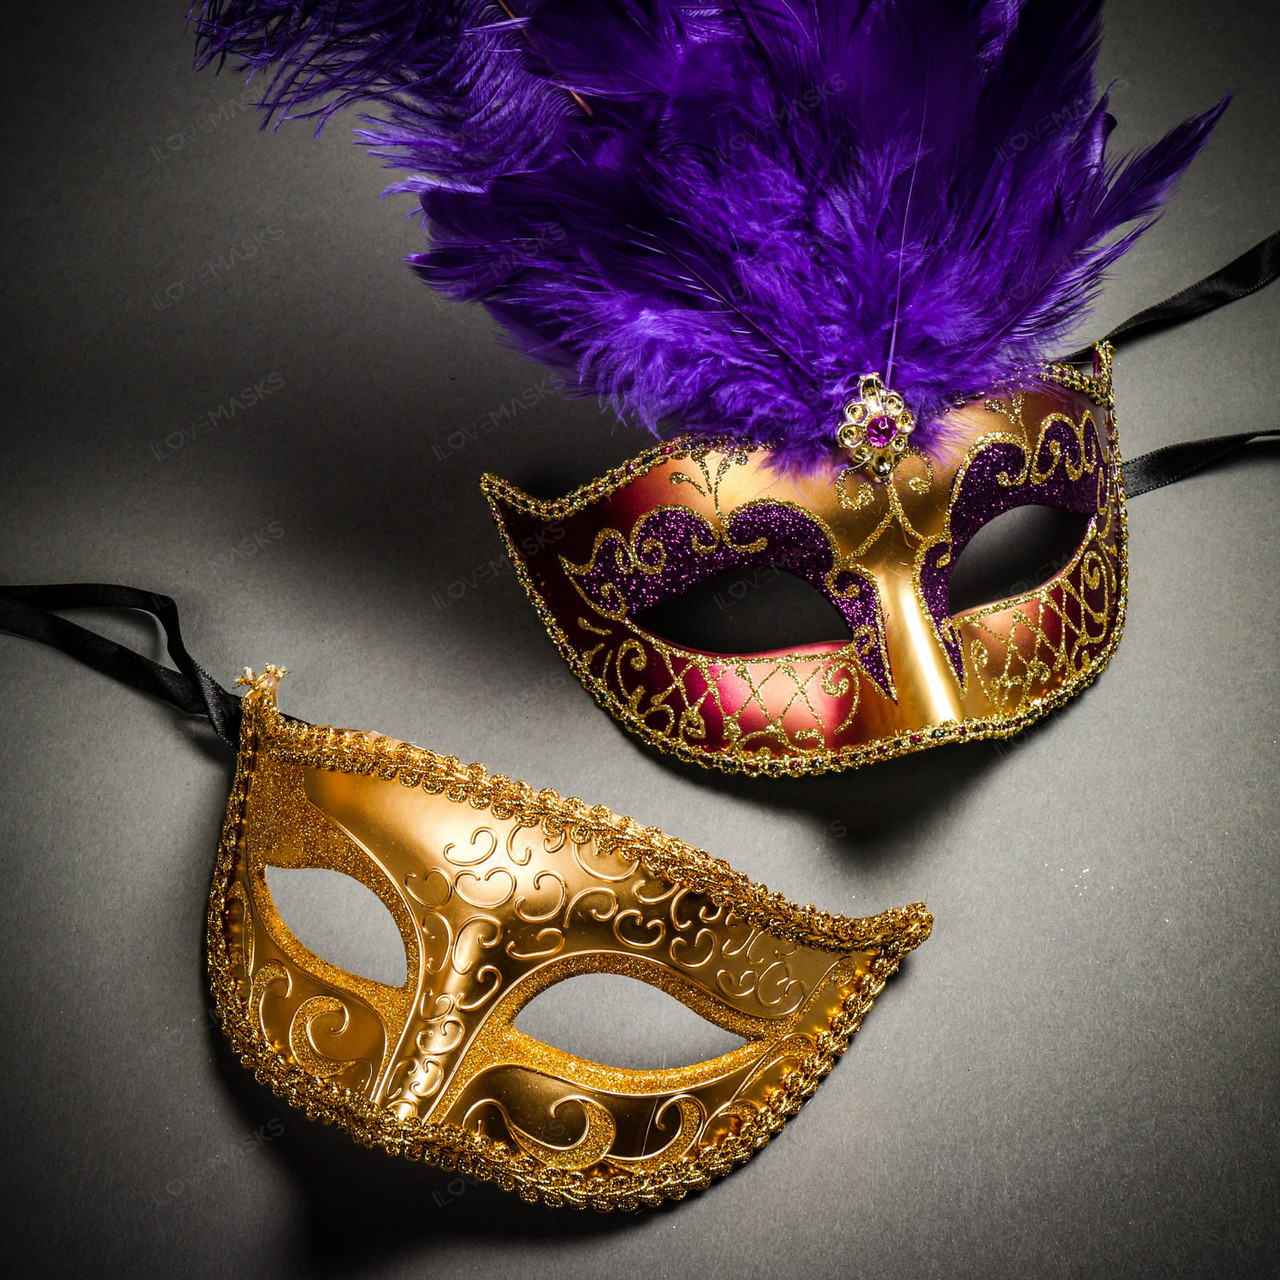 Purple and Black Couples Venetian Party Mask - Couples Masquerade Masks